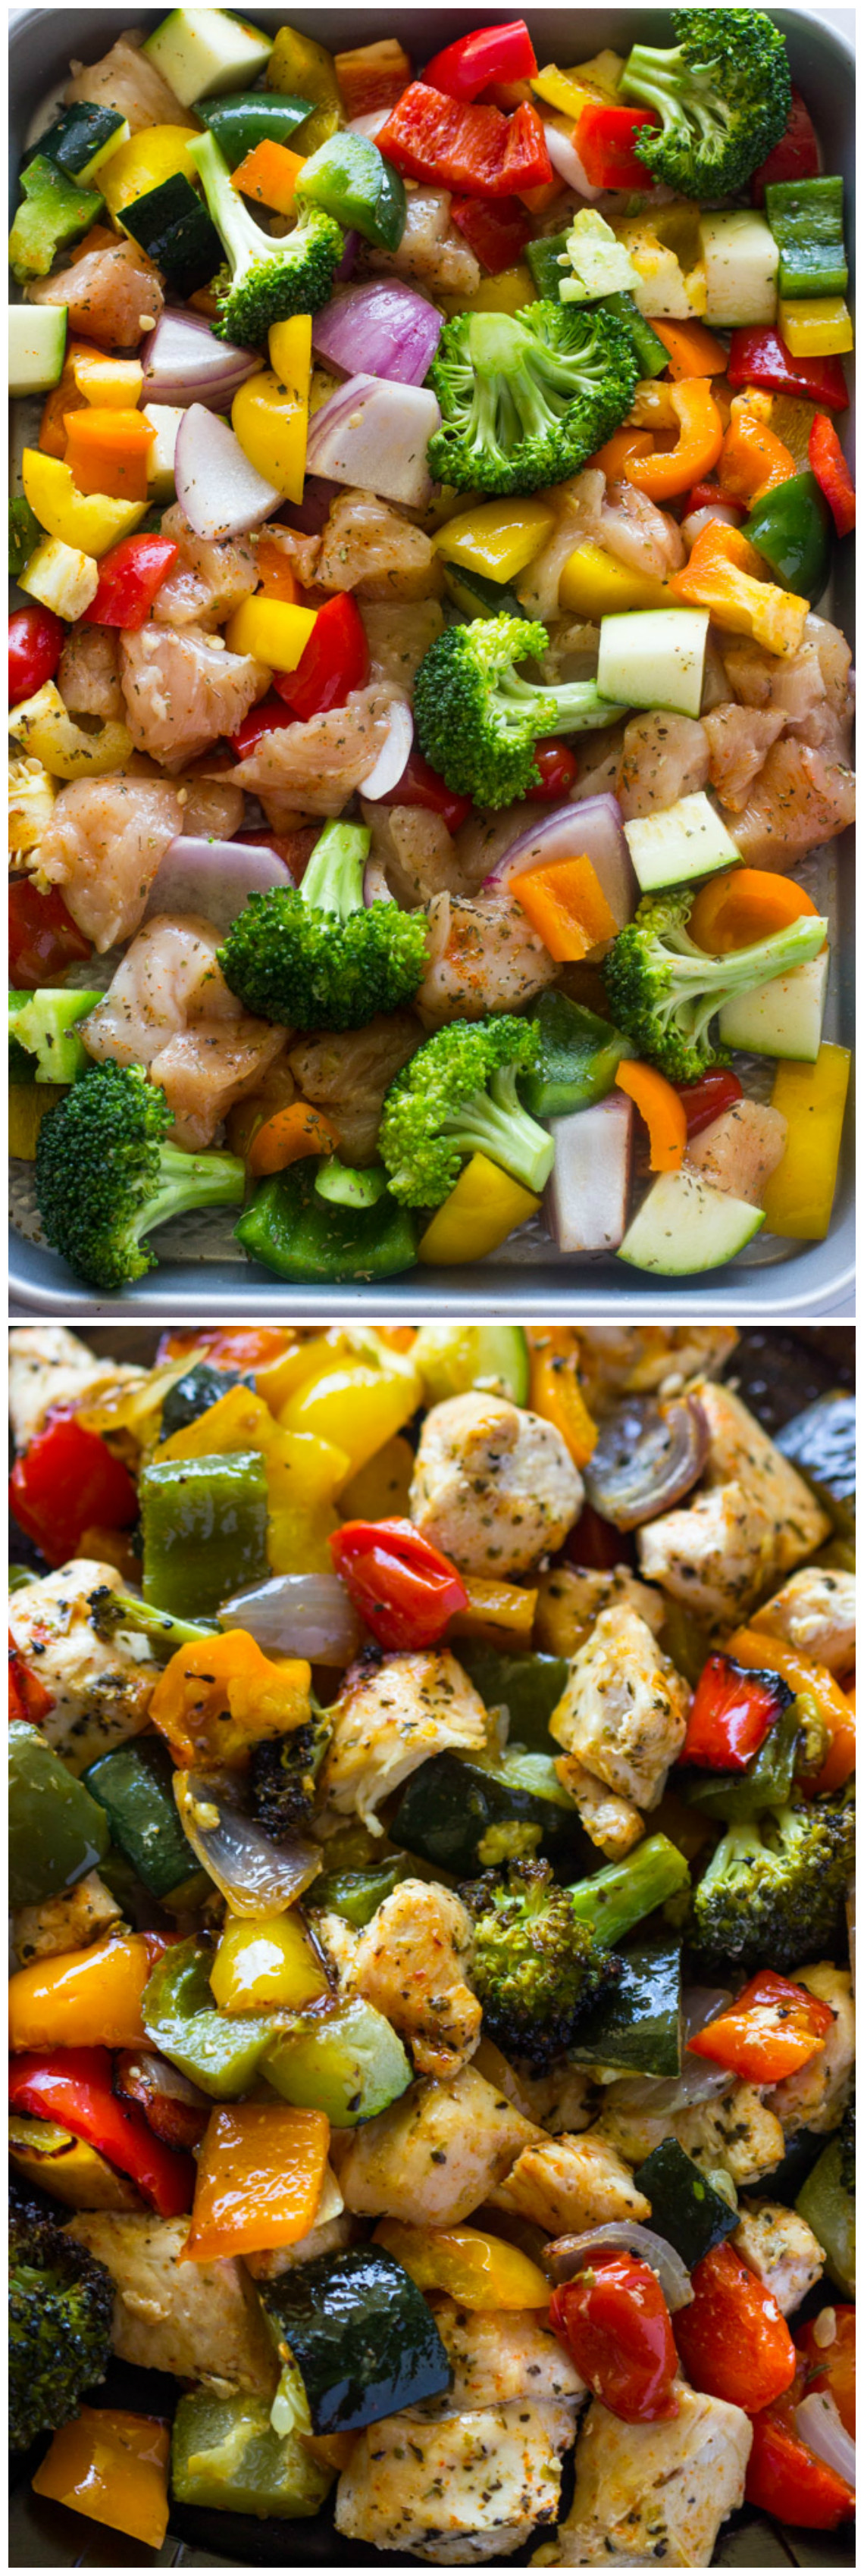 Is Roasted Chicken Healthy
 15 Minute Healthy Roasted Chicken and Veggies Video